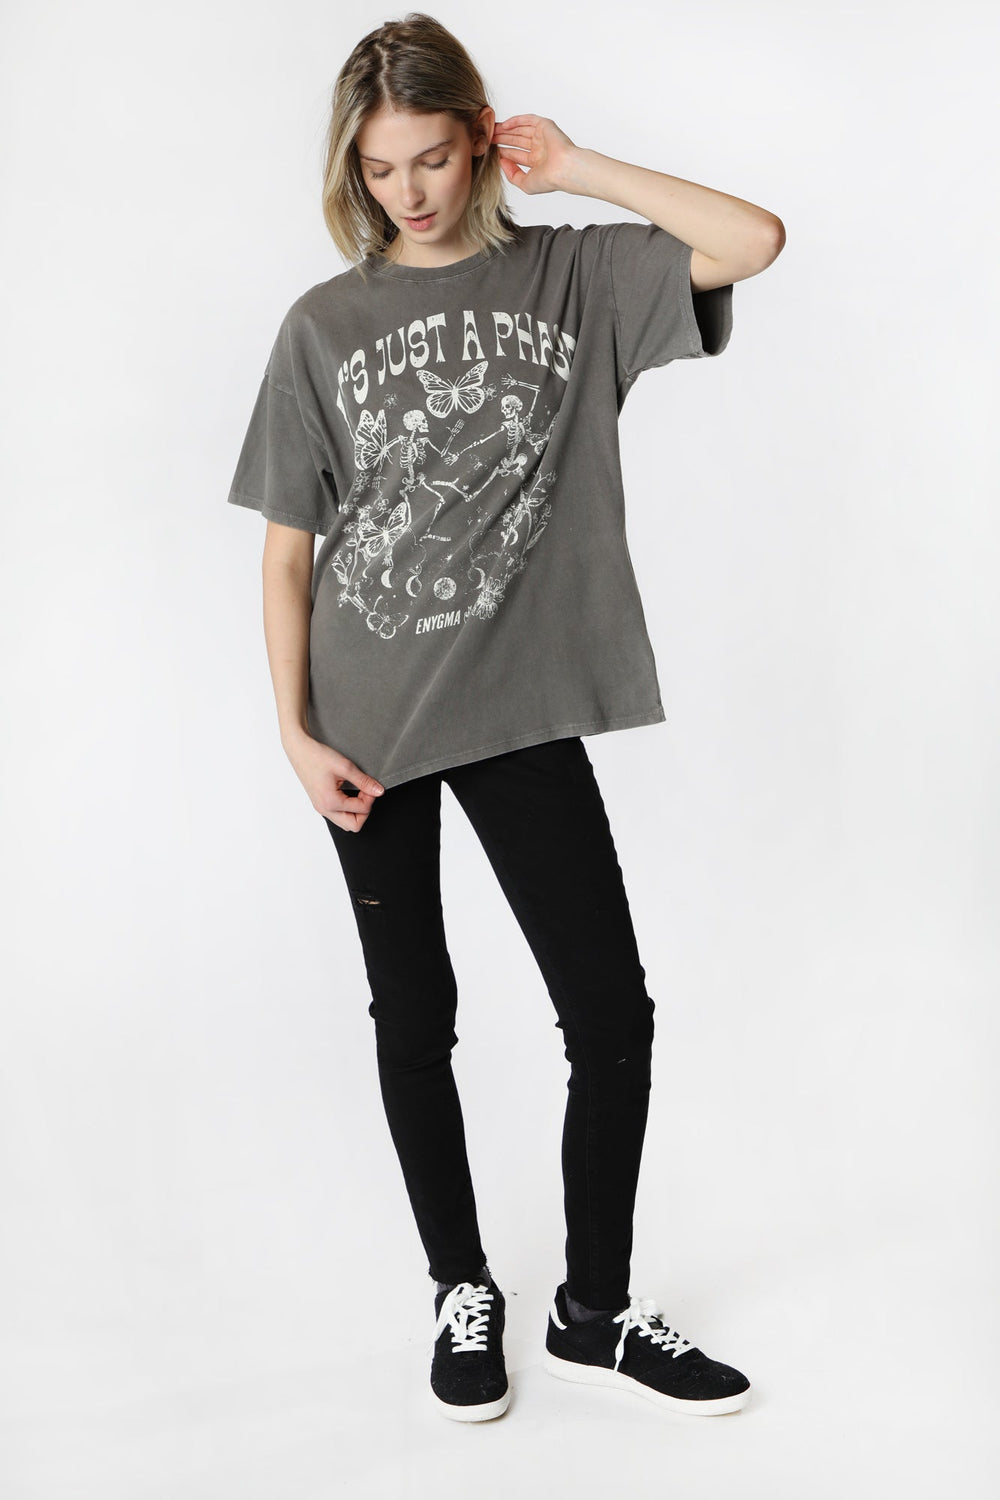 Womens Enygma Just a Phase Oversized T-Shirt Womens Enygma Just a Phase Oversized T-Shirt